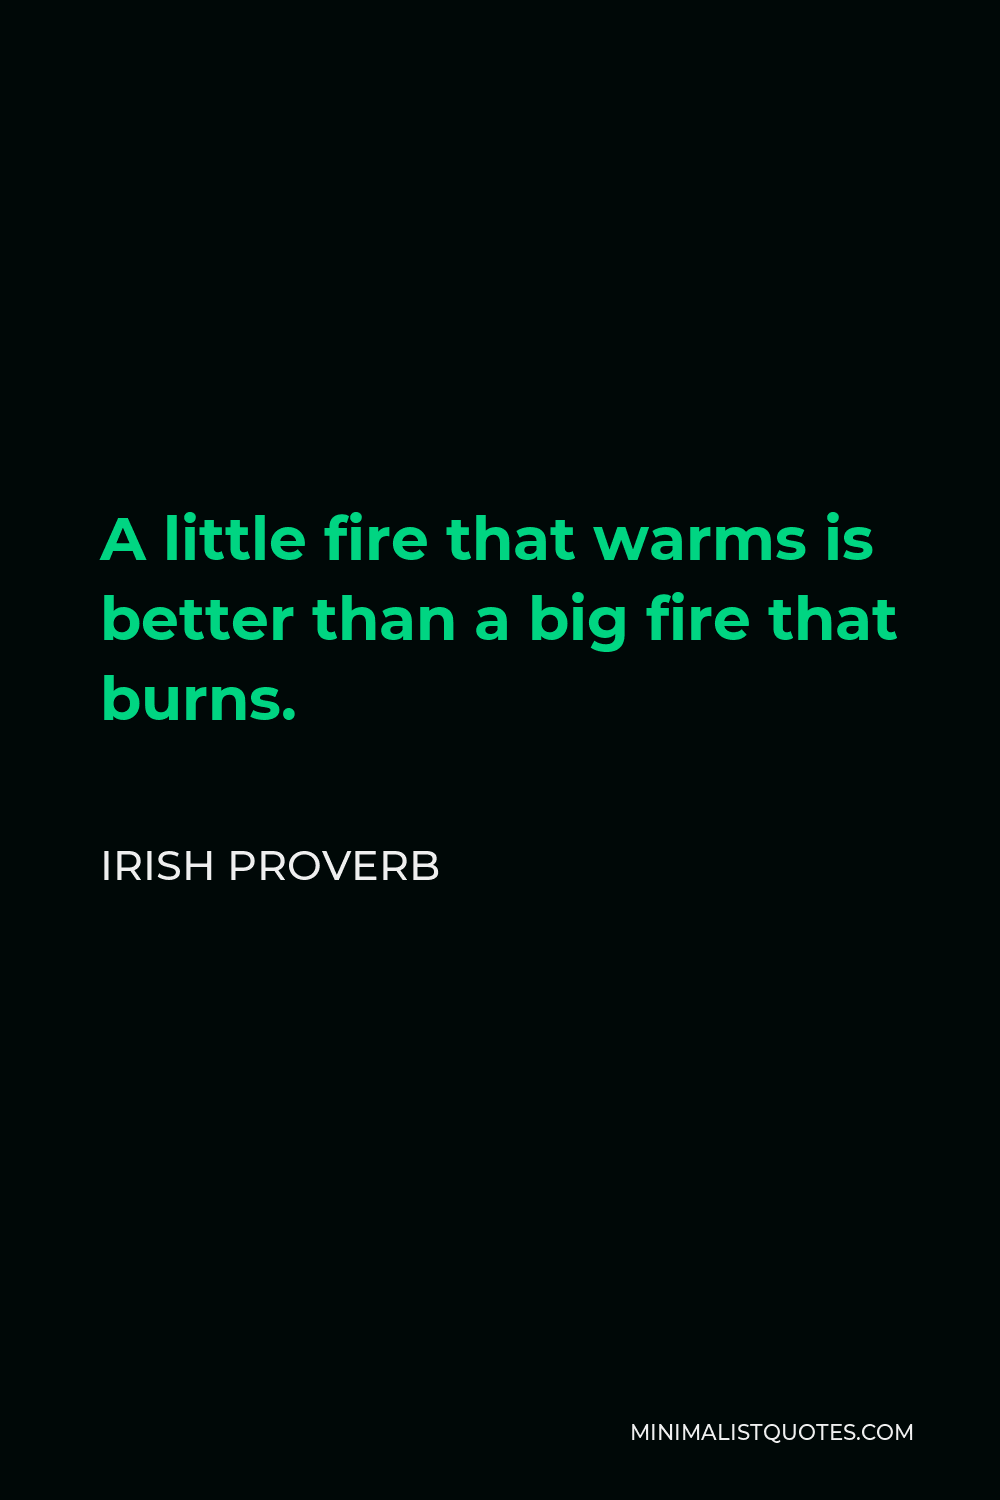 Irish Proverb Quote - A little fire that warms is better than a big fire that burns.